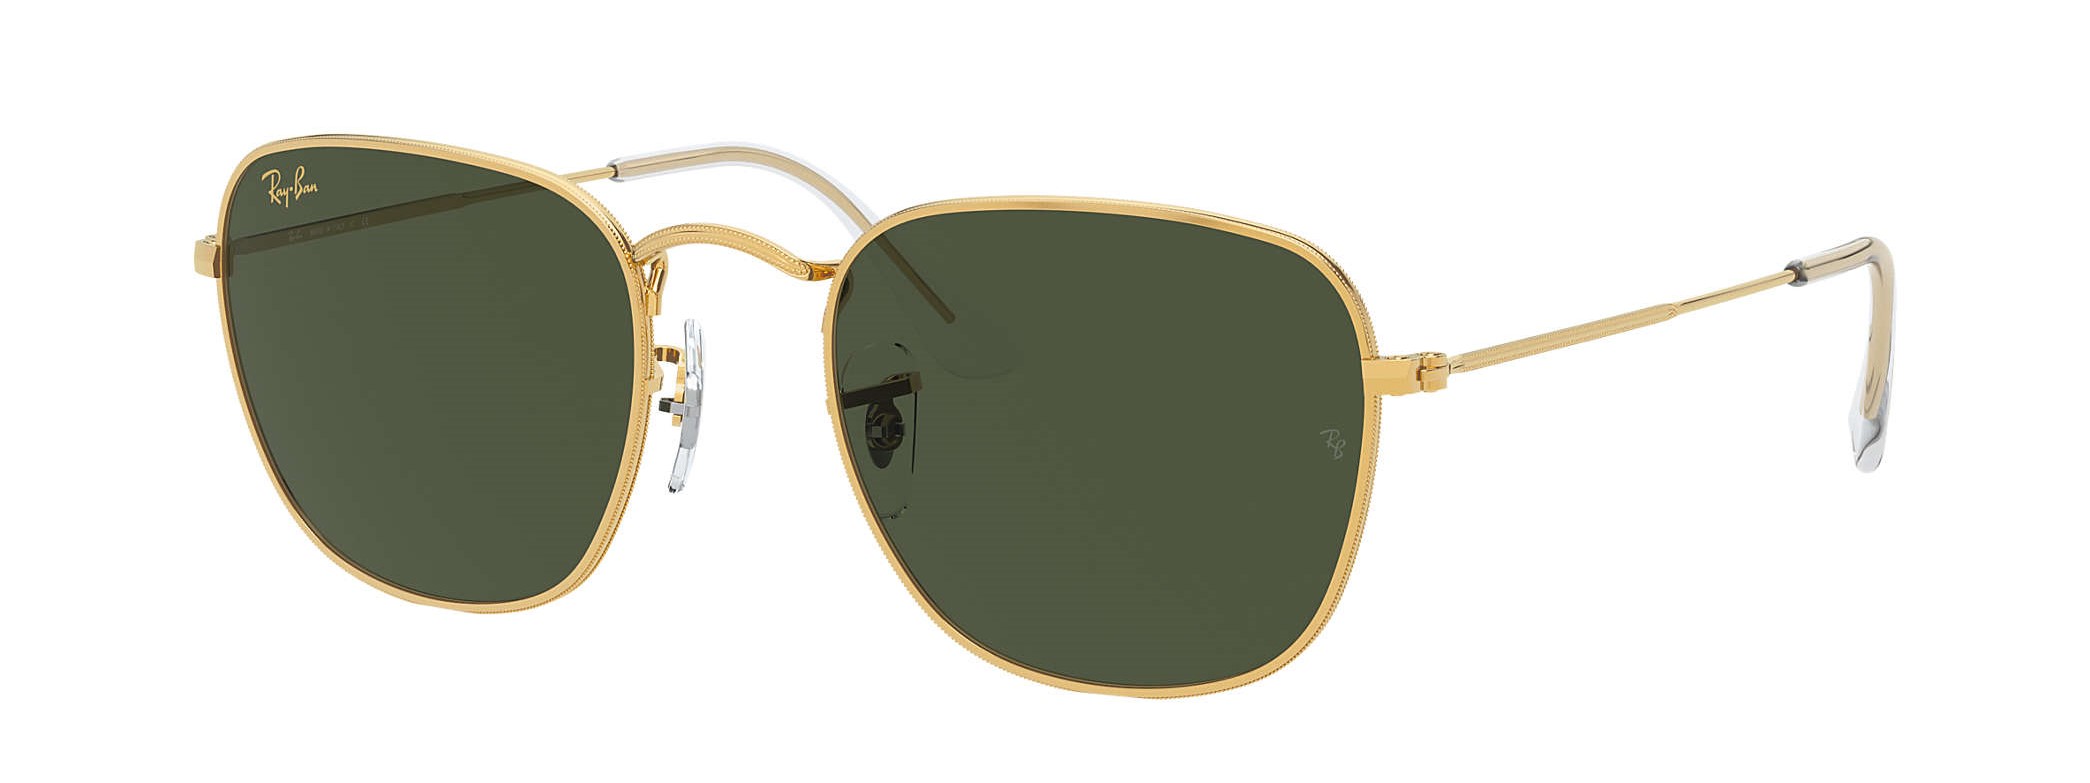 Ray-Ban RB3857 Frank sunglasses in gold with square crystal lenses in g-15 green